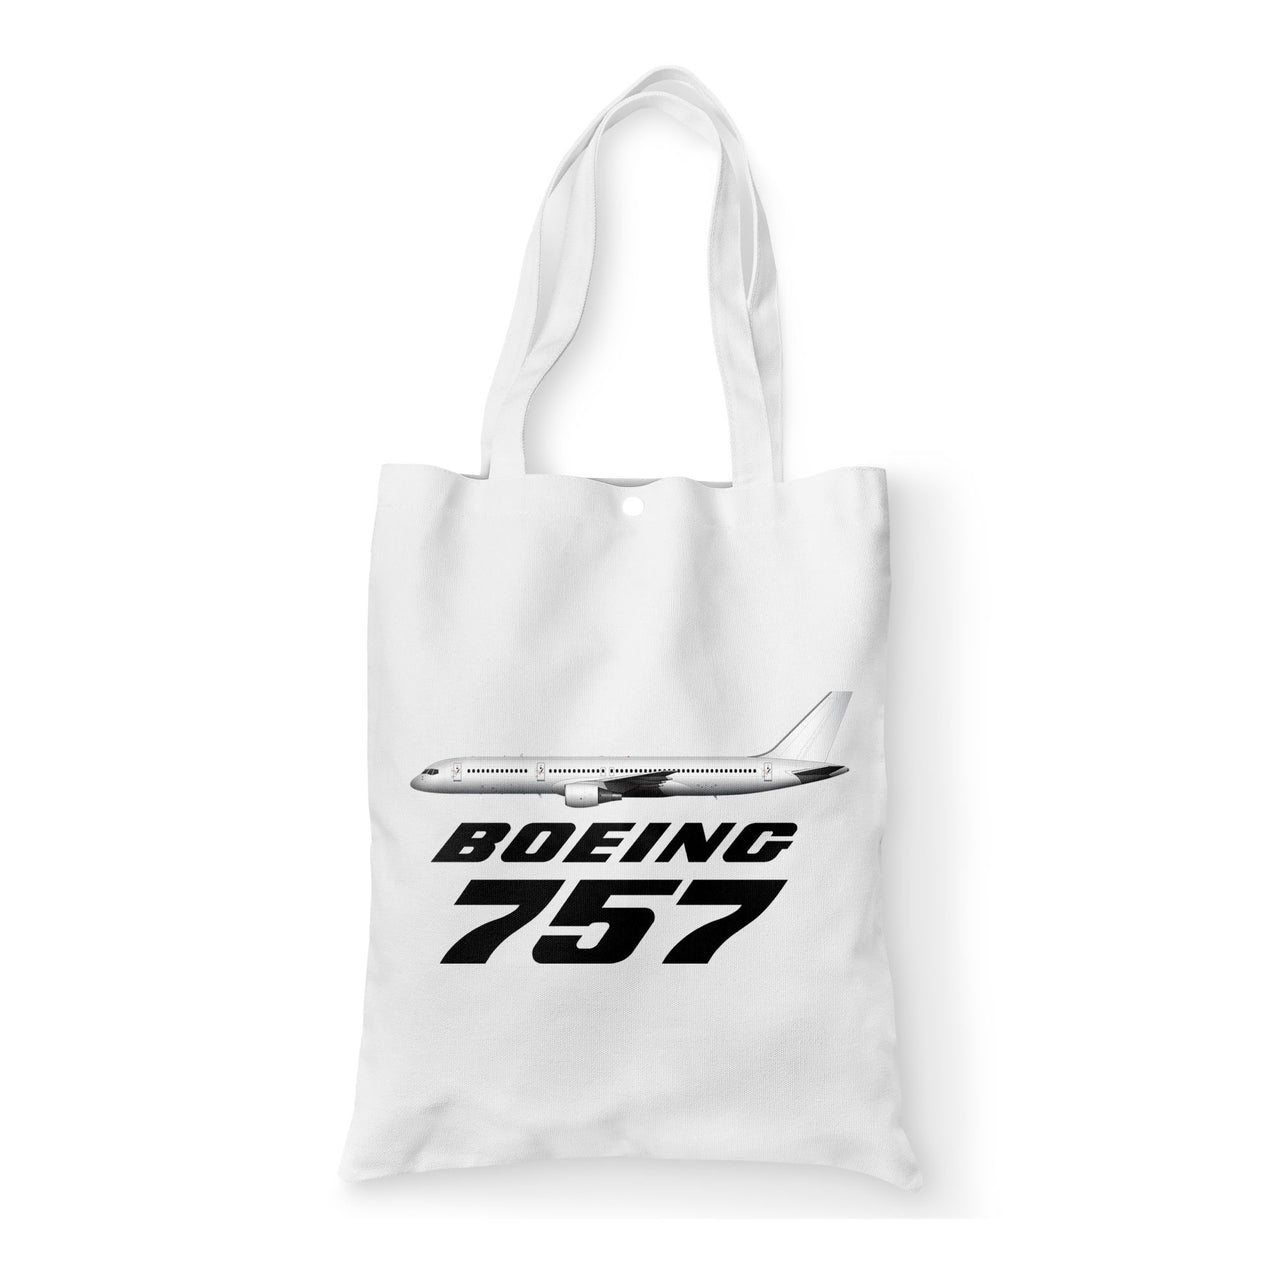 The Boeing 757 Designed Tote Bags